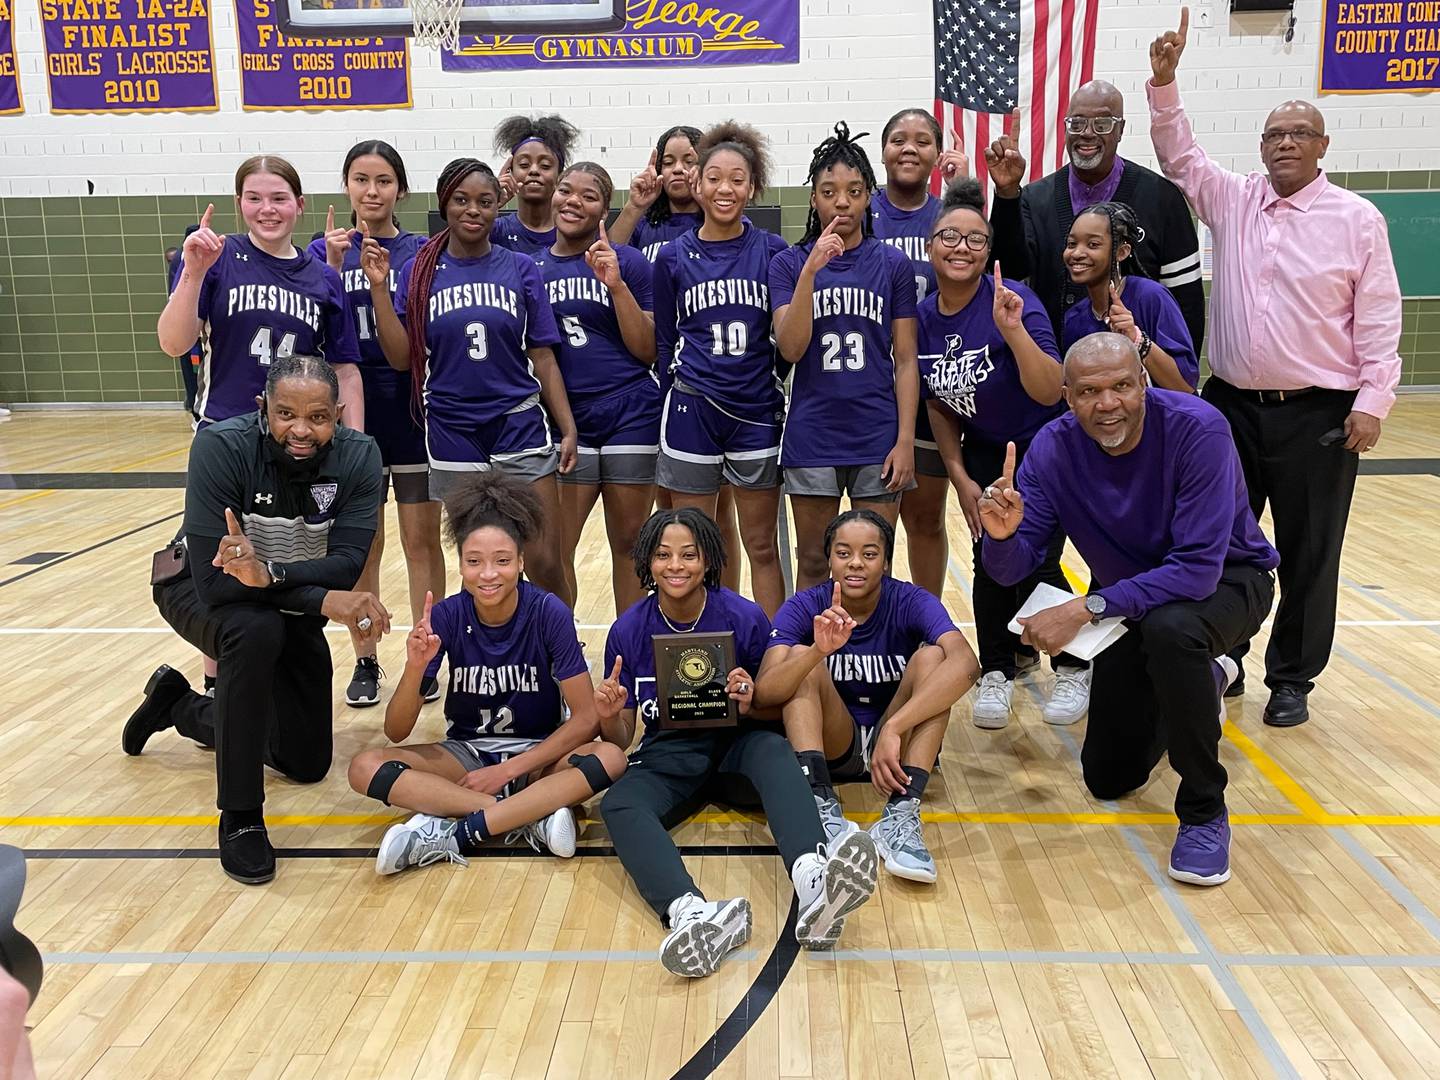 Pikesville's girls basketball team had to come from behind to beat host Loch Raven, 57-48, for the Class 1A South Region I championship Wednesday night. Mariah Jones-Bey (front row, right) scored 16 of her 24 points in the second half as the No. 10 Panthers stayed on course to go for their third straight Class 1A championship.